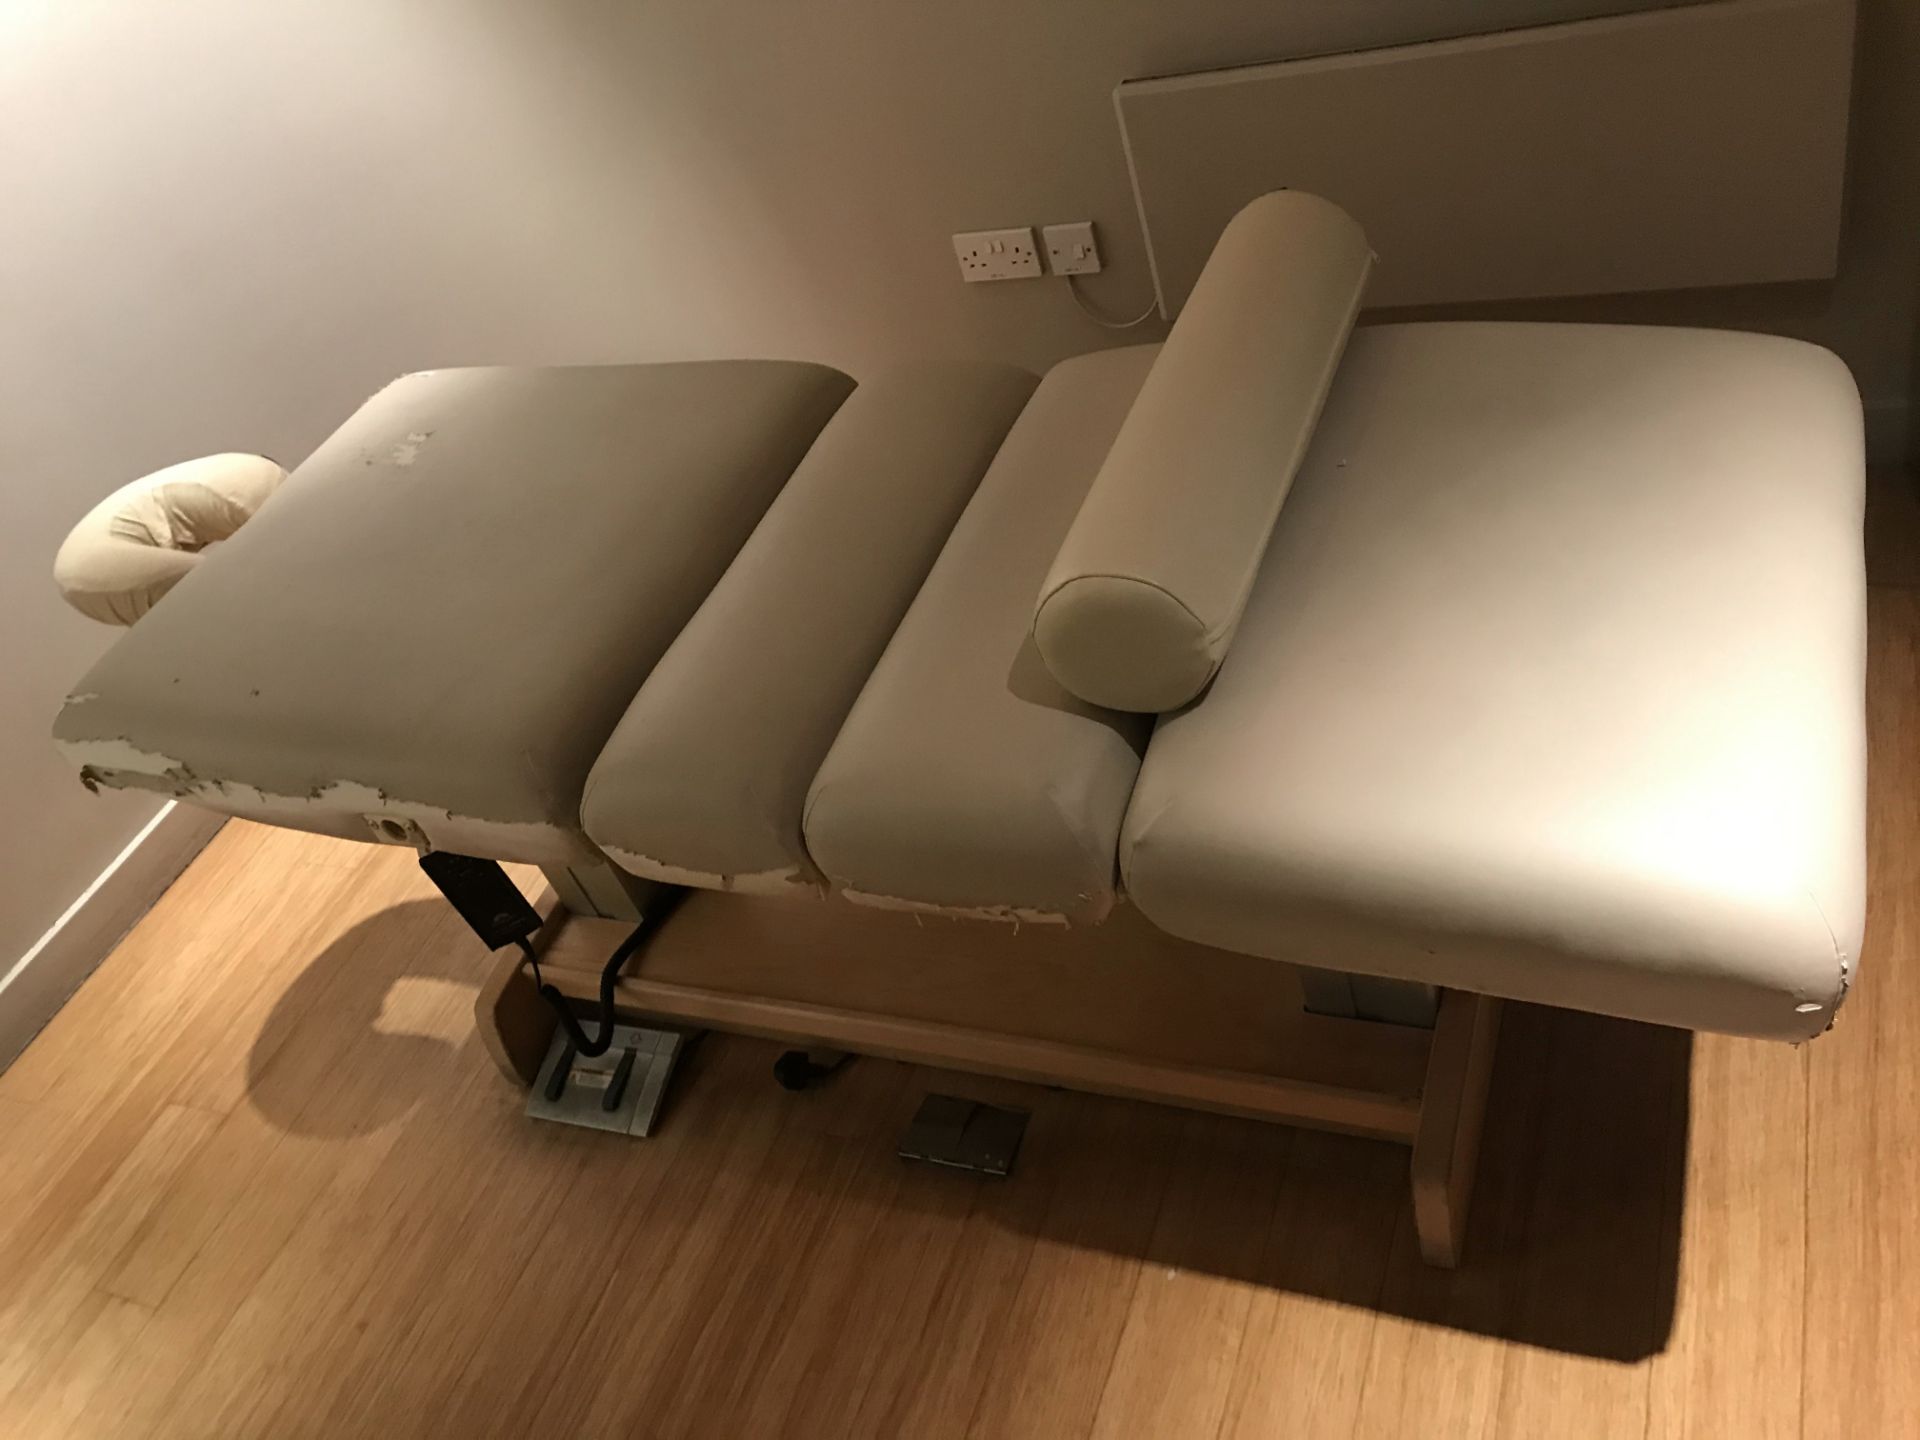 1 x Oakworks Clinician Electric-Hydraulic Massage Table With Footpedal and Linak HBWO Remote Control - Image 5 of 11